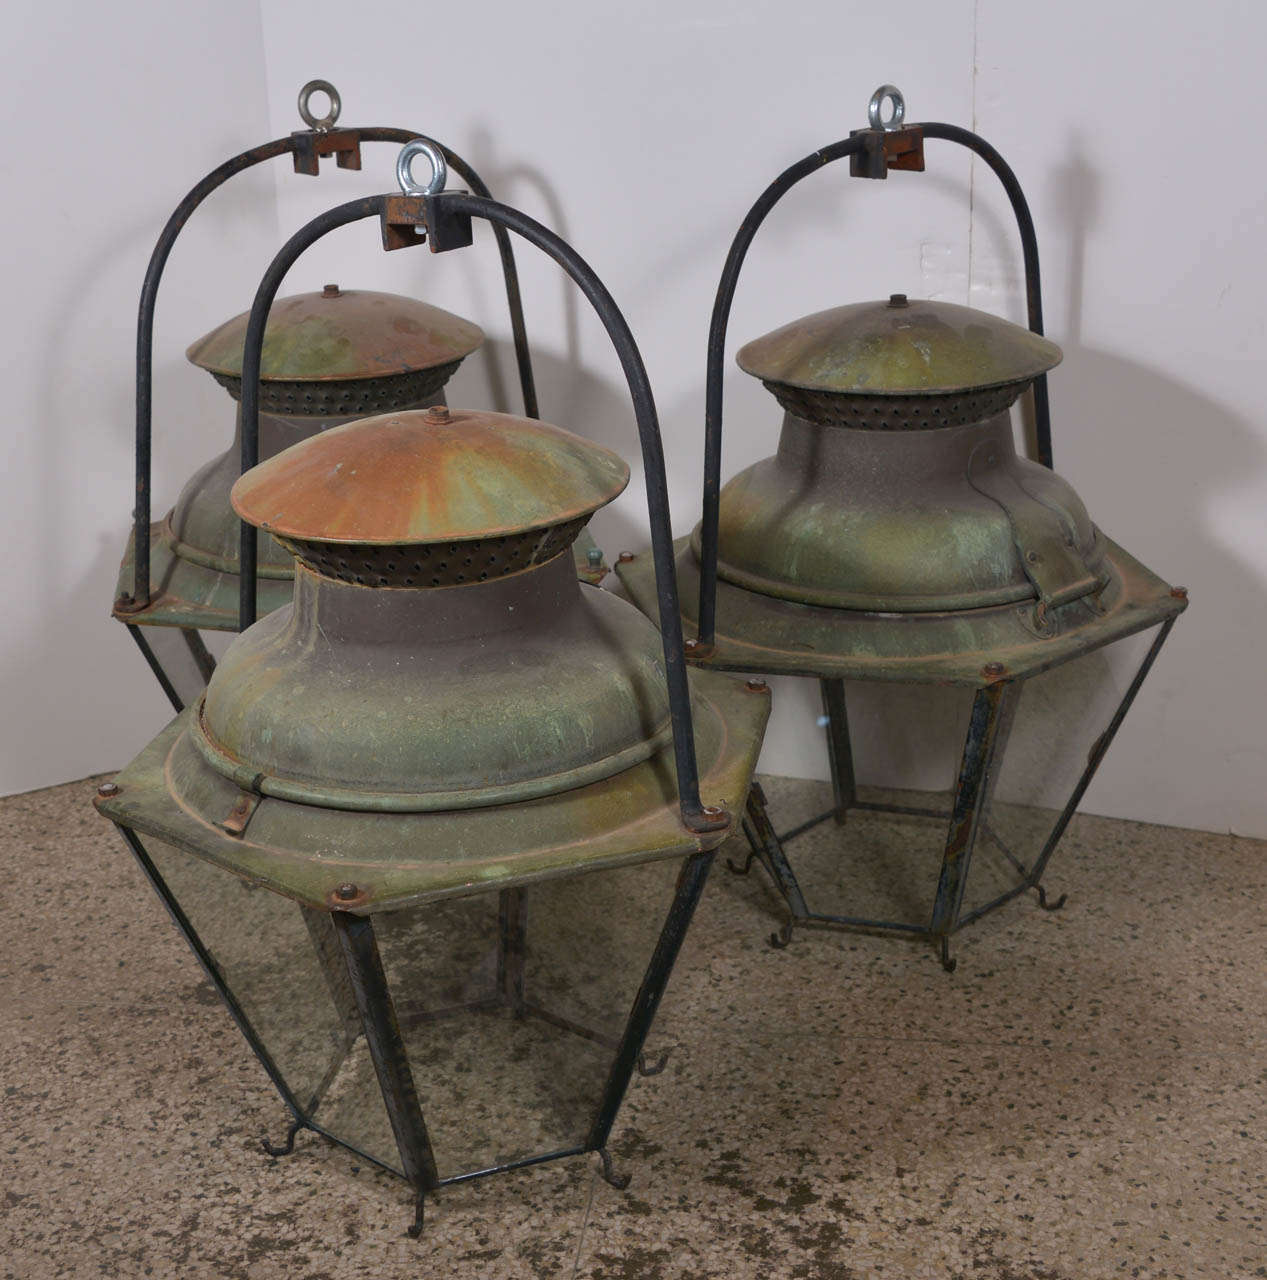 Large copper lantern, octagonal design. Only one lantern remains available for purchase.